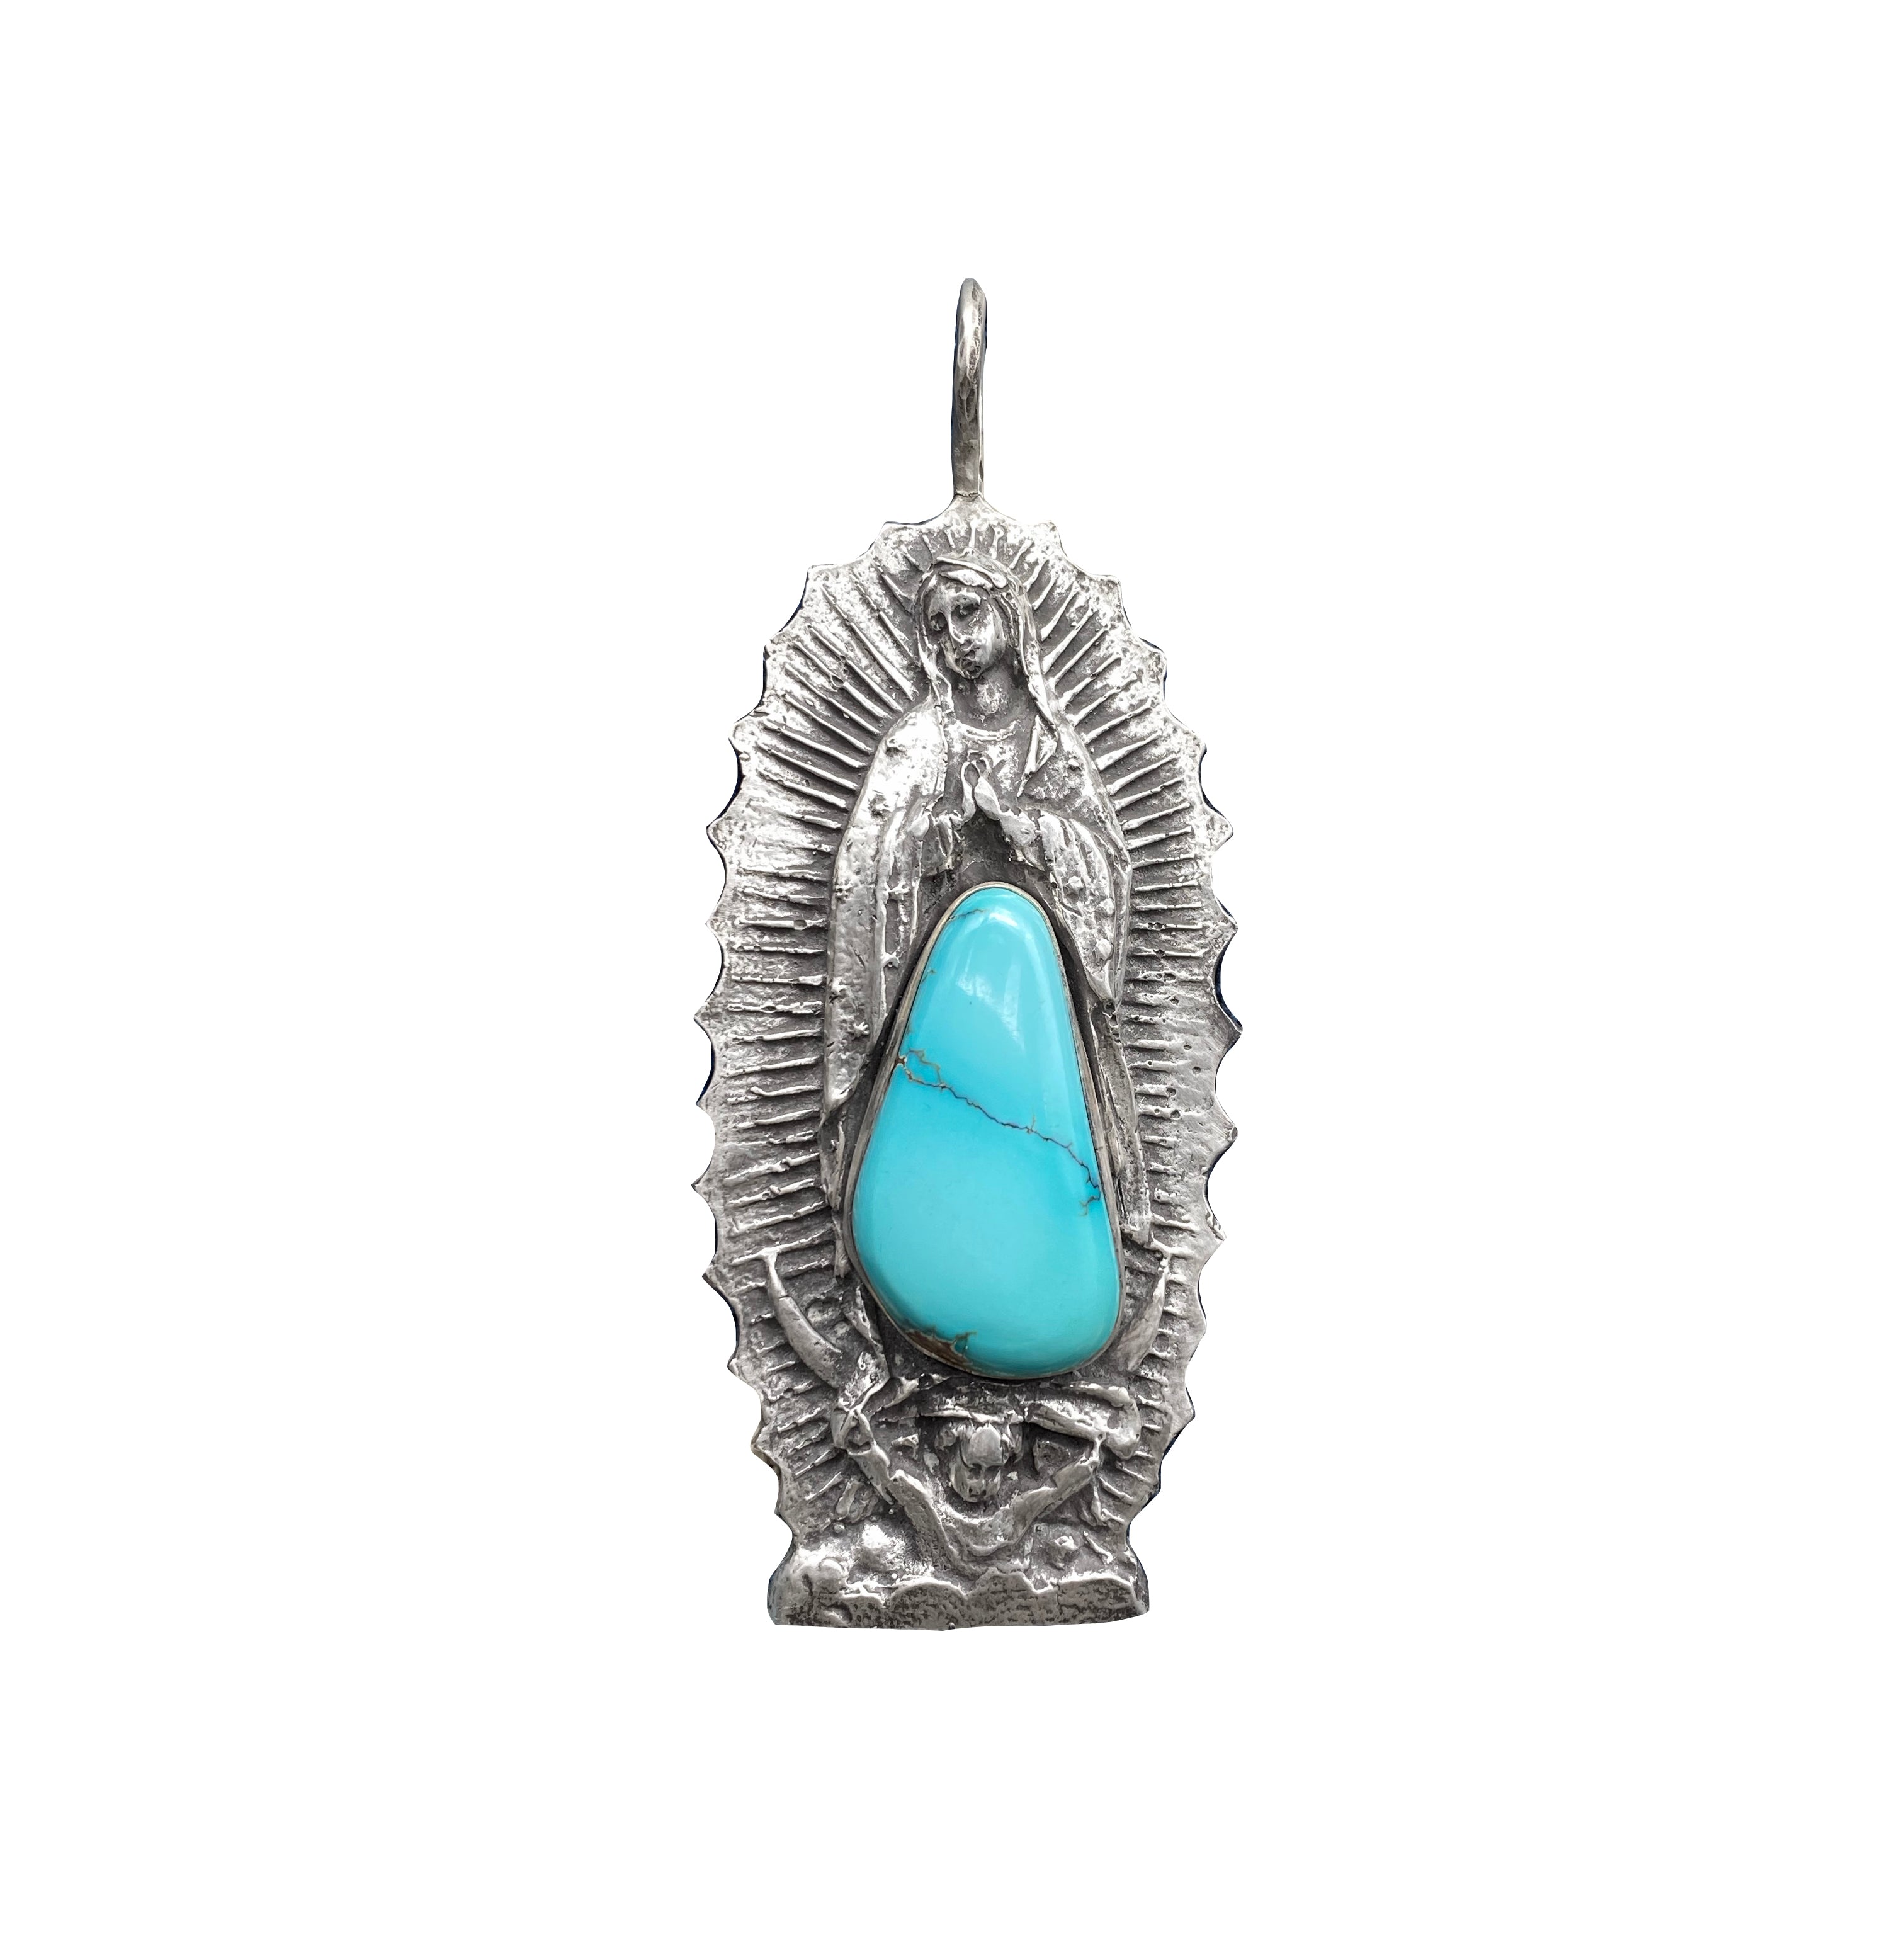 The Guadalupe Pendant